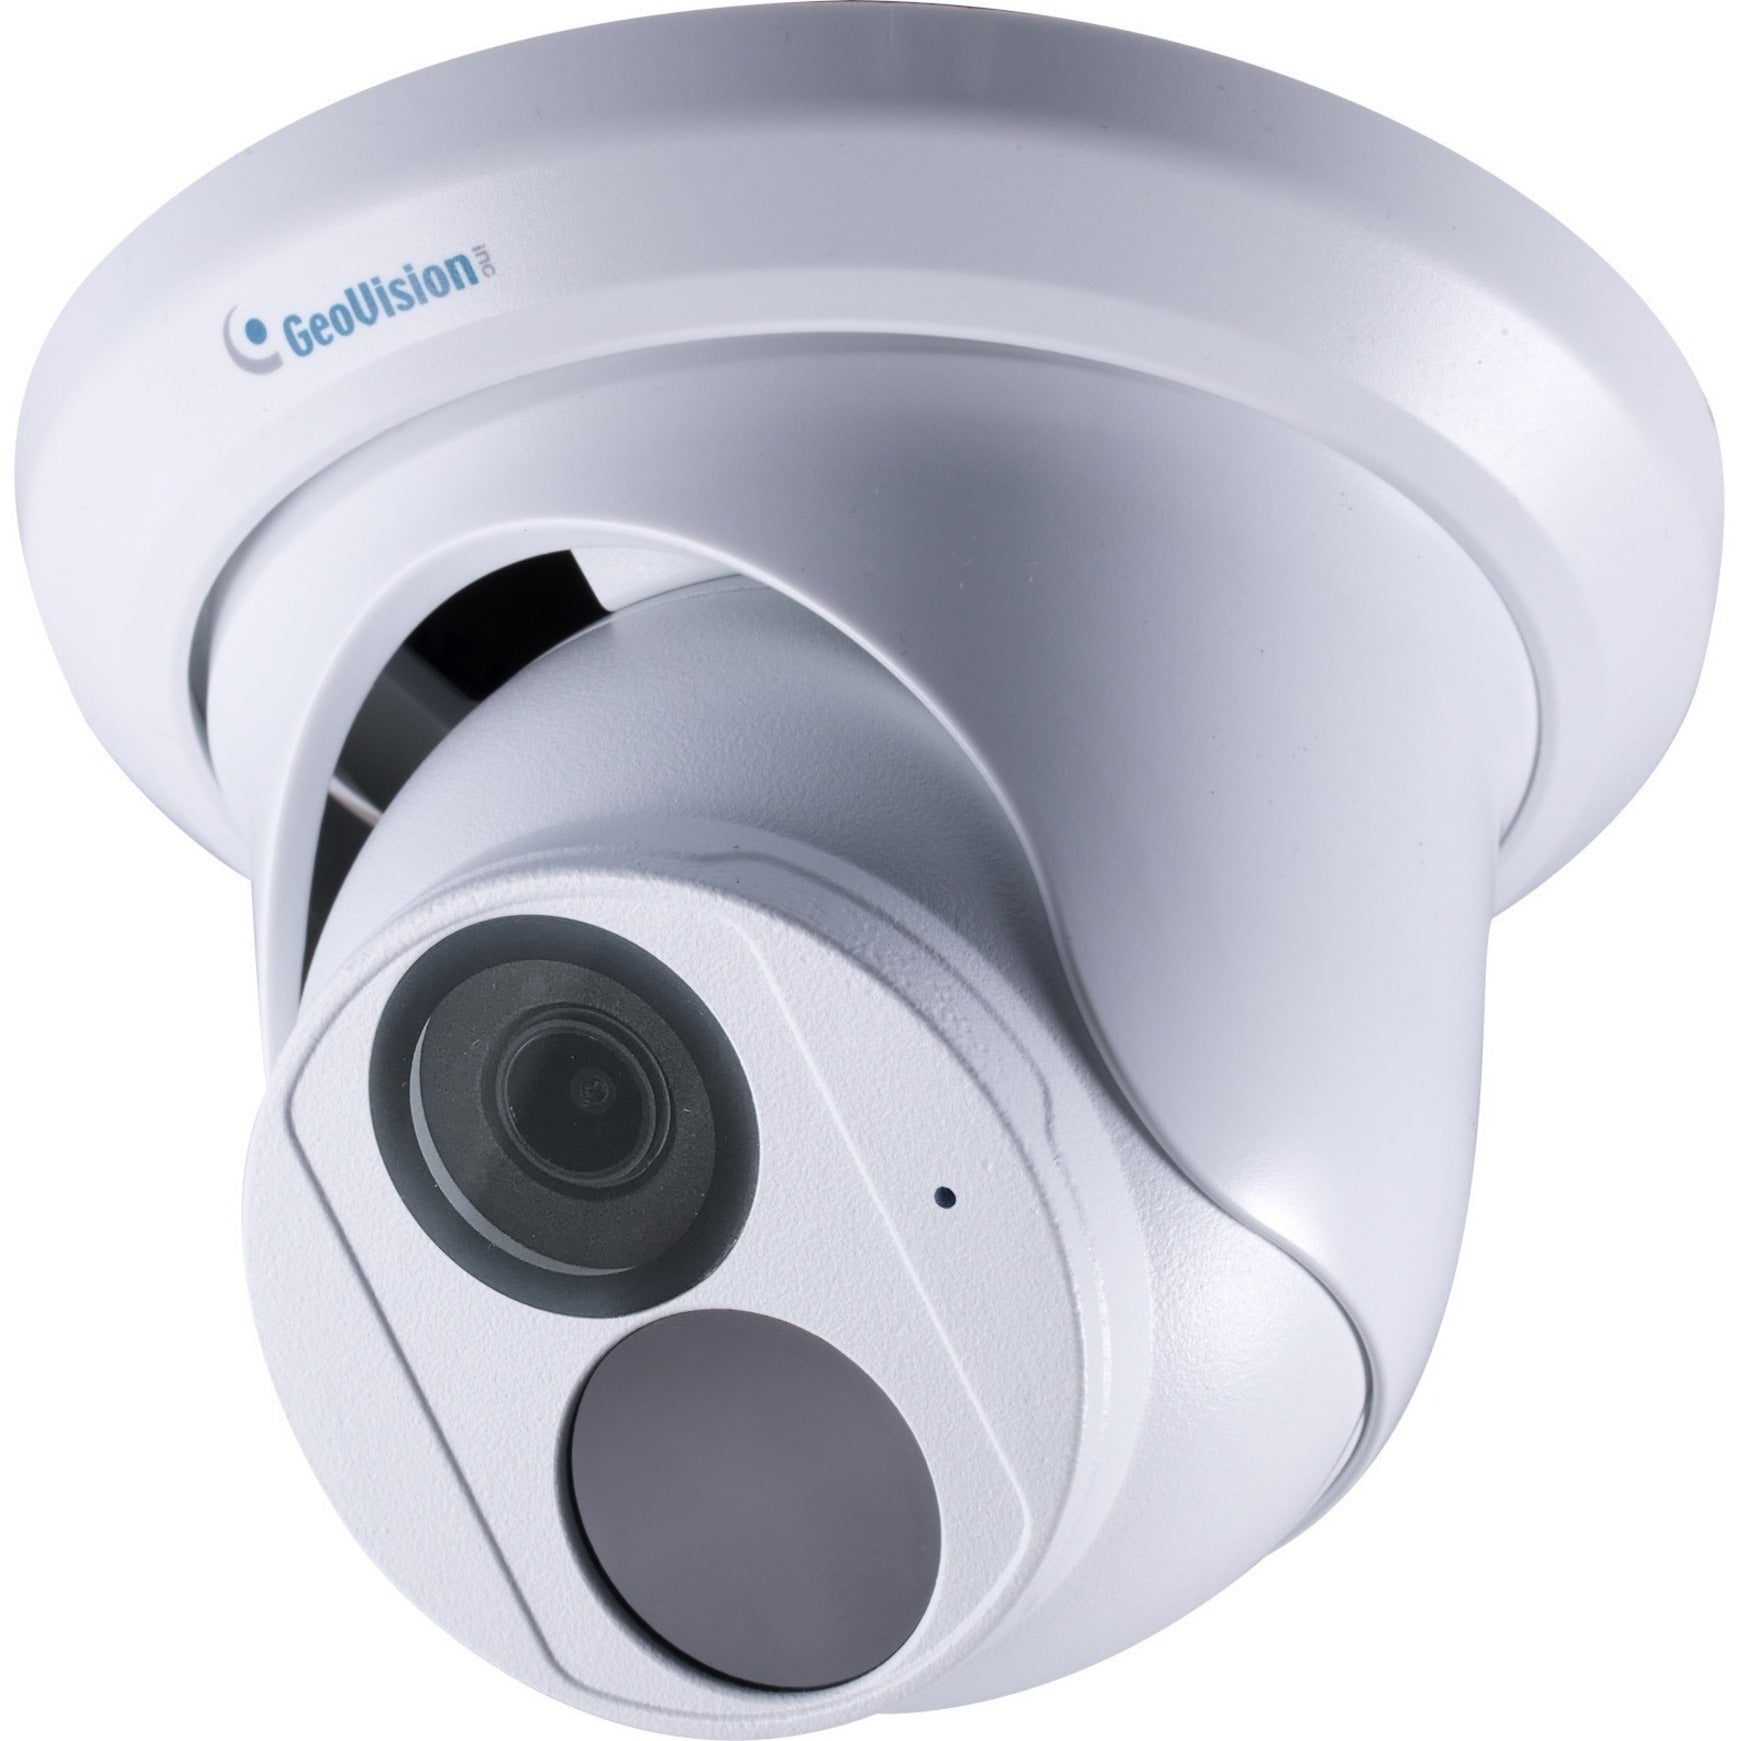 GeoVision 125-EBD4704-000 4MP H.265 Super Low Lux WDR Pro IR Eyeball Dome IP Camera, Outdoor, 2.8mm Lens, 2688 x 1520 Resolution